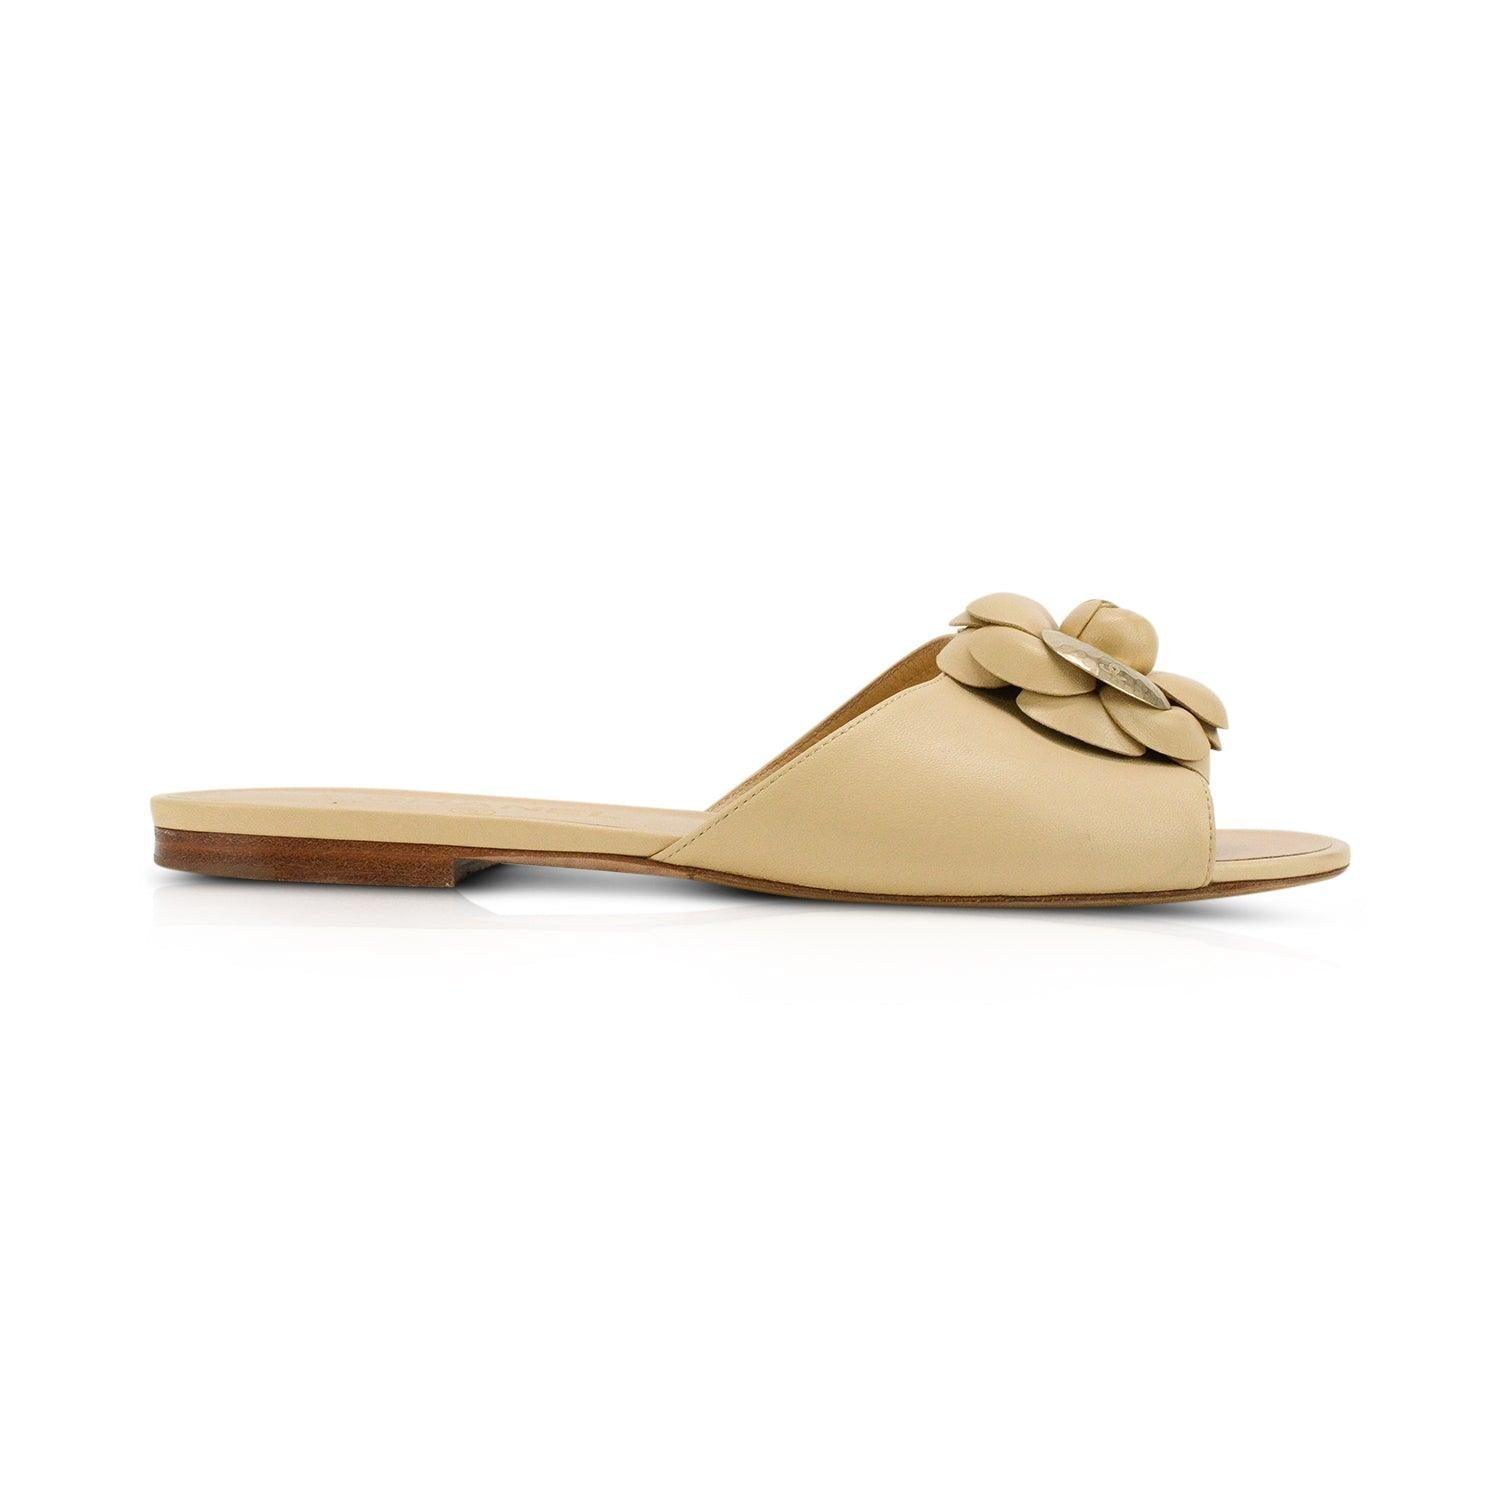 Chanel Sandal - Women's 39.5 - Fashionably Yours